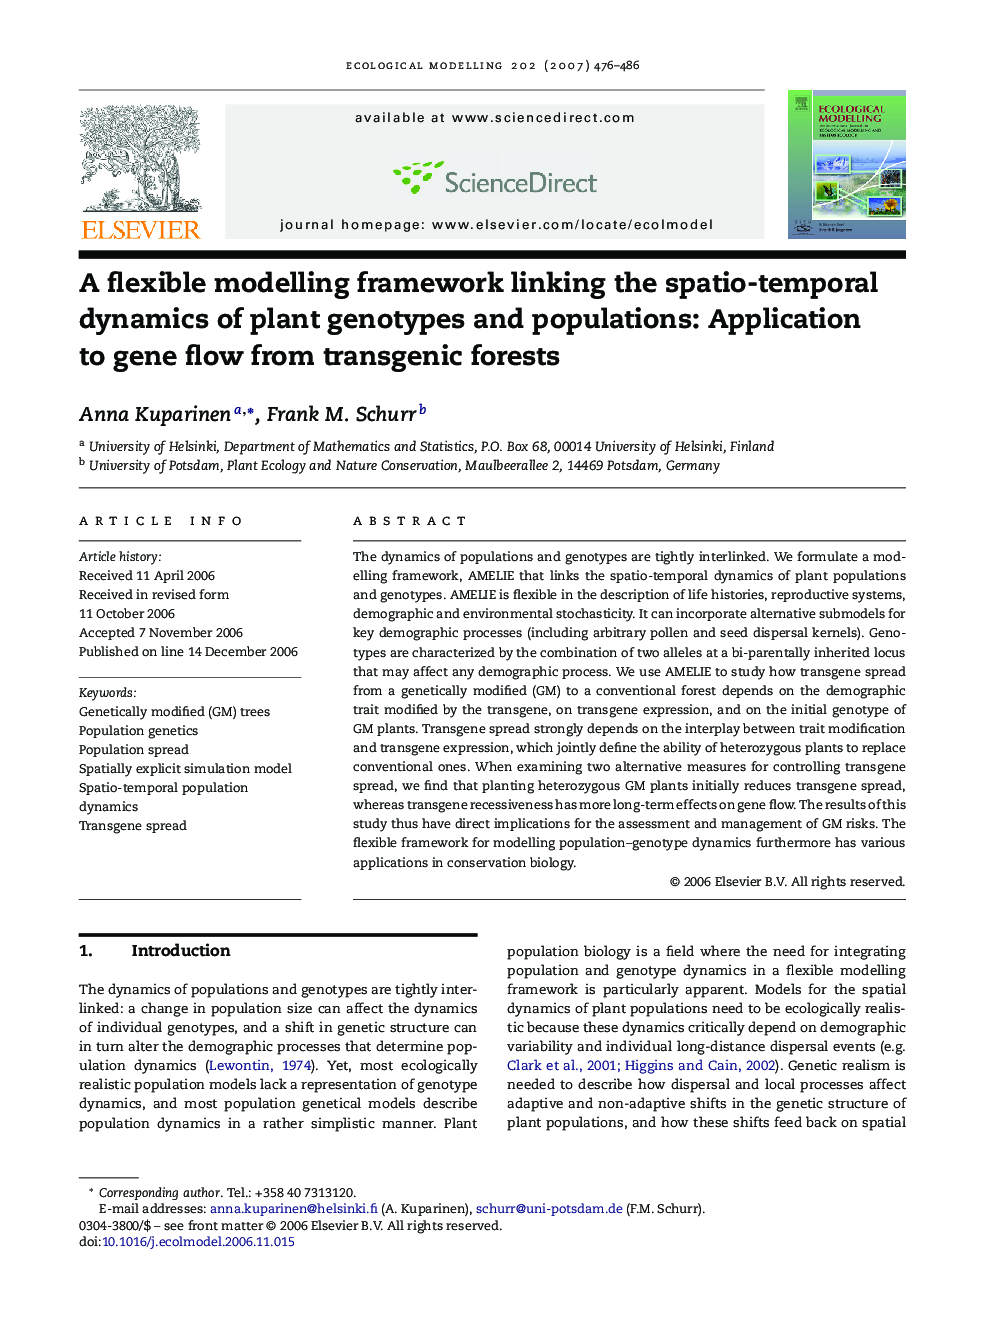 A flexible modelling framework linking the spatio-temporal dynamics of plant genotypes and populations: Application to gene flow from transgenic forests